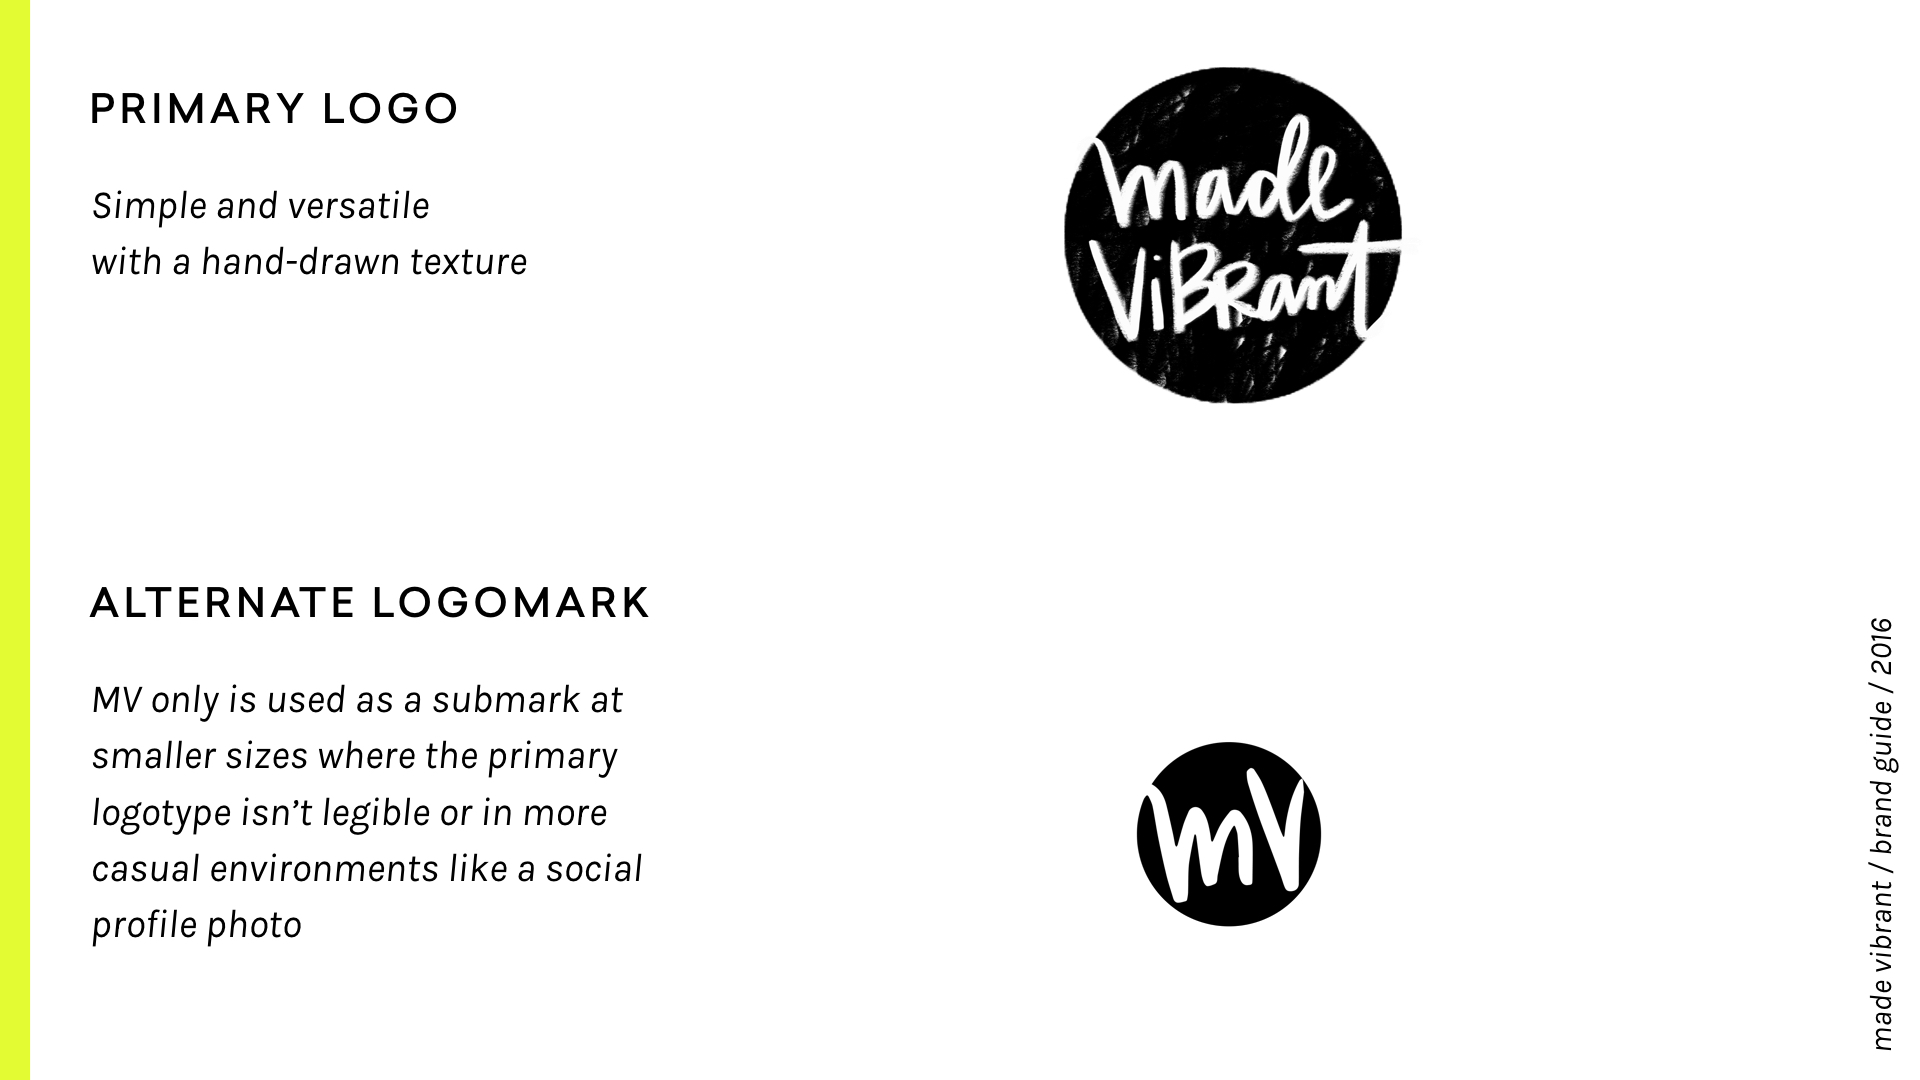 Made Vibrant 3.0 Brand Guidelines / vibrant, approachable, and creative branding / logo and submark